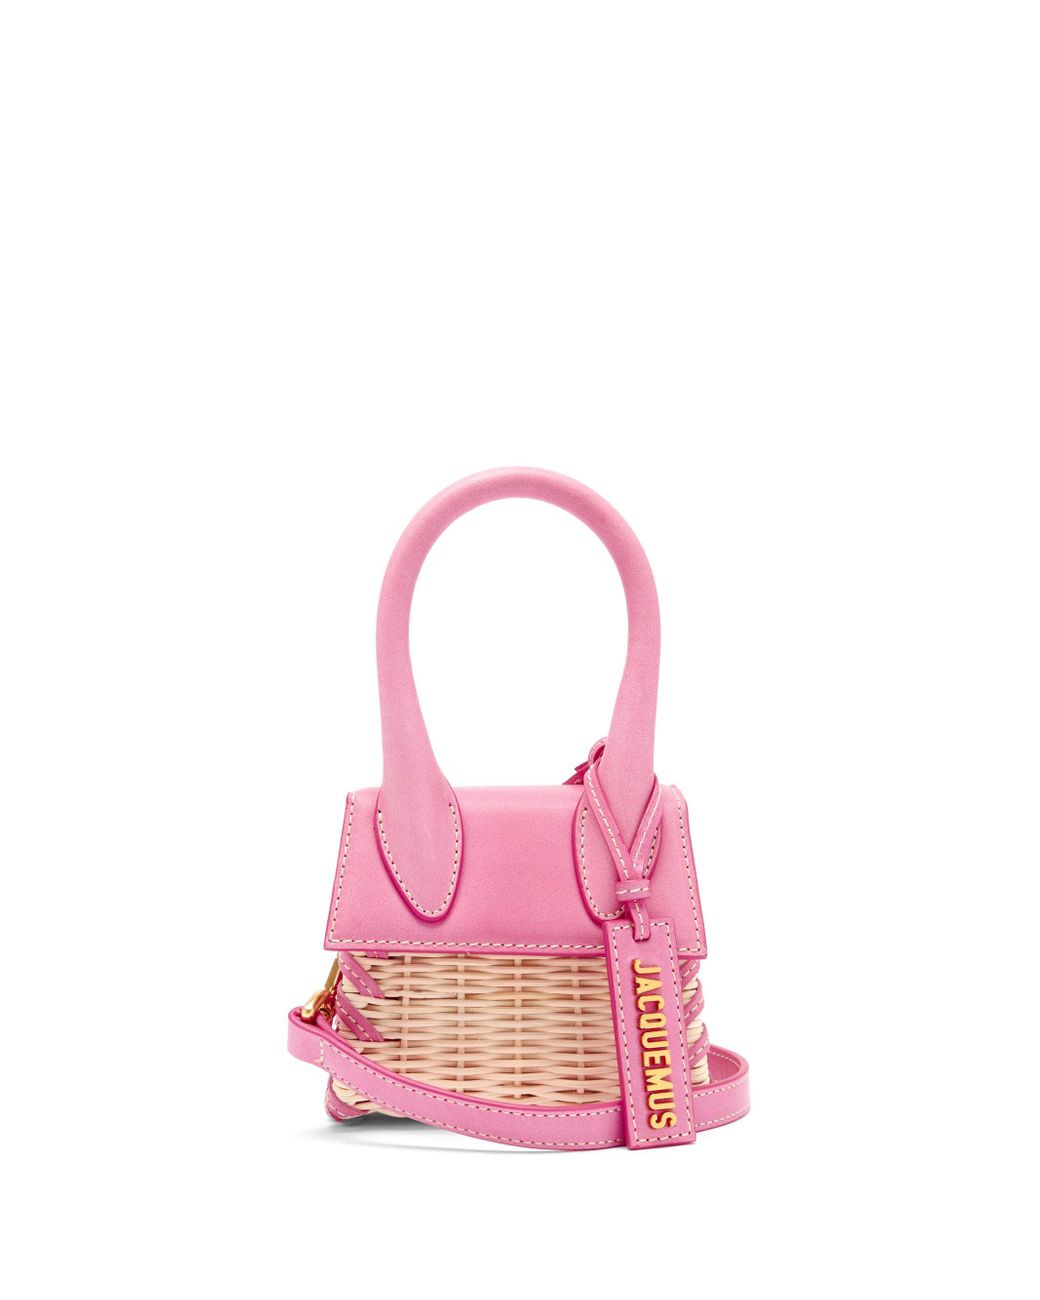 Jacquemus Le Chiquito Leather-trimmed Wicker Tote in Pink | Lyst